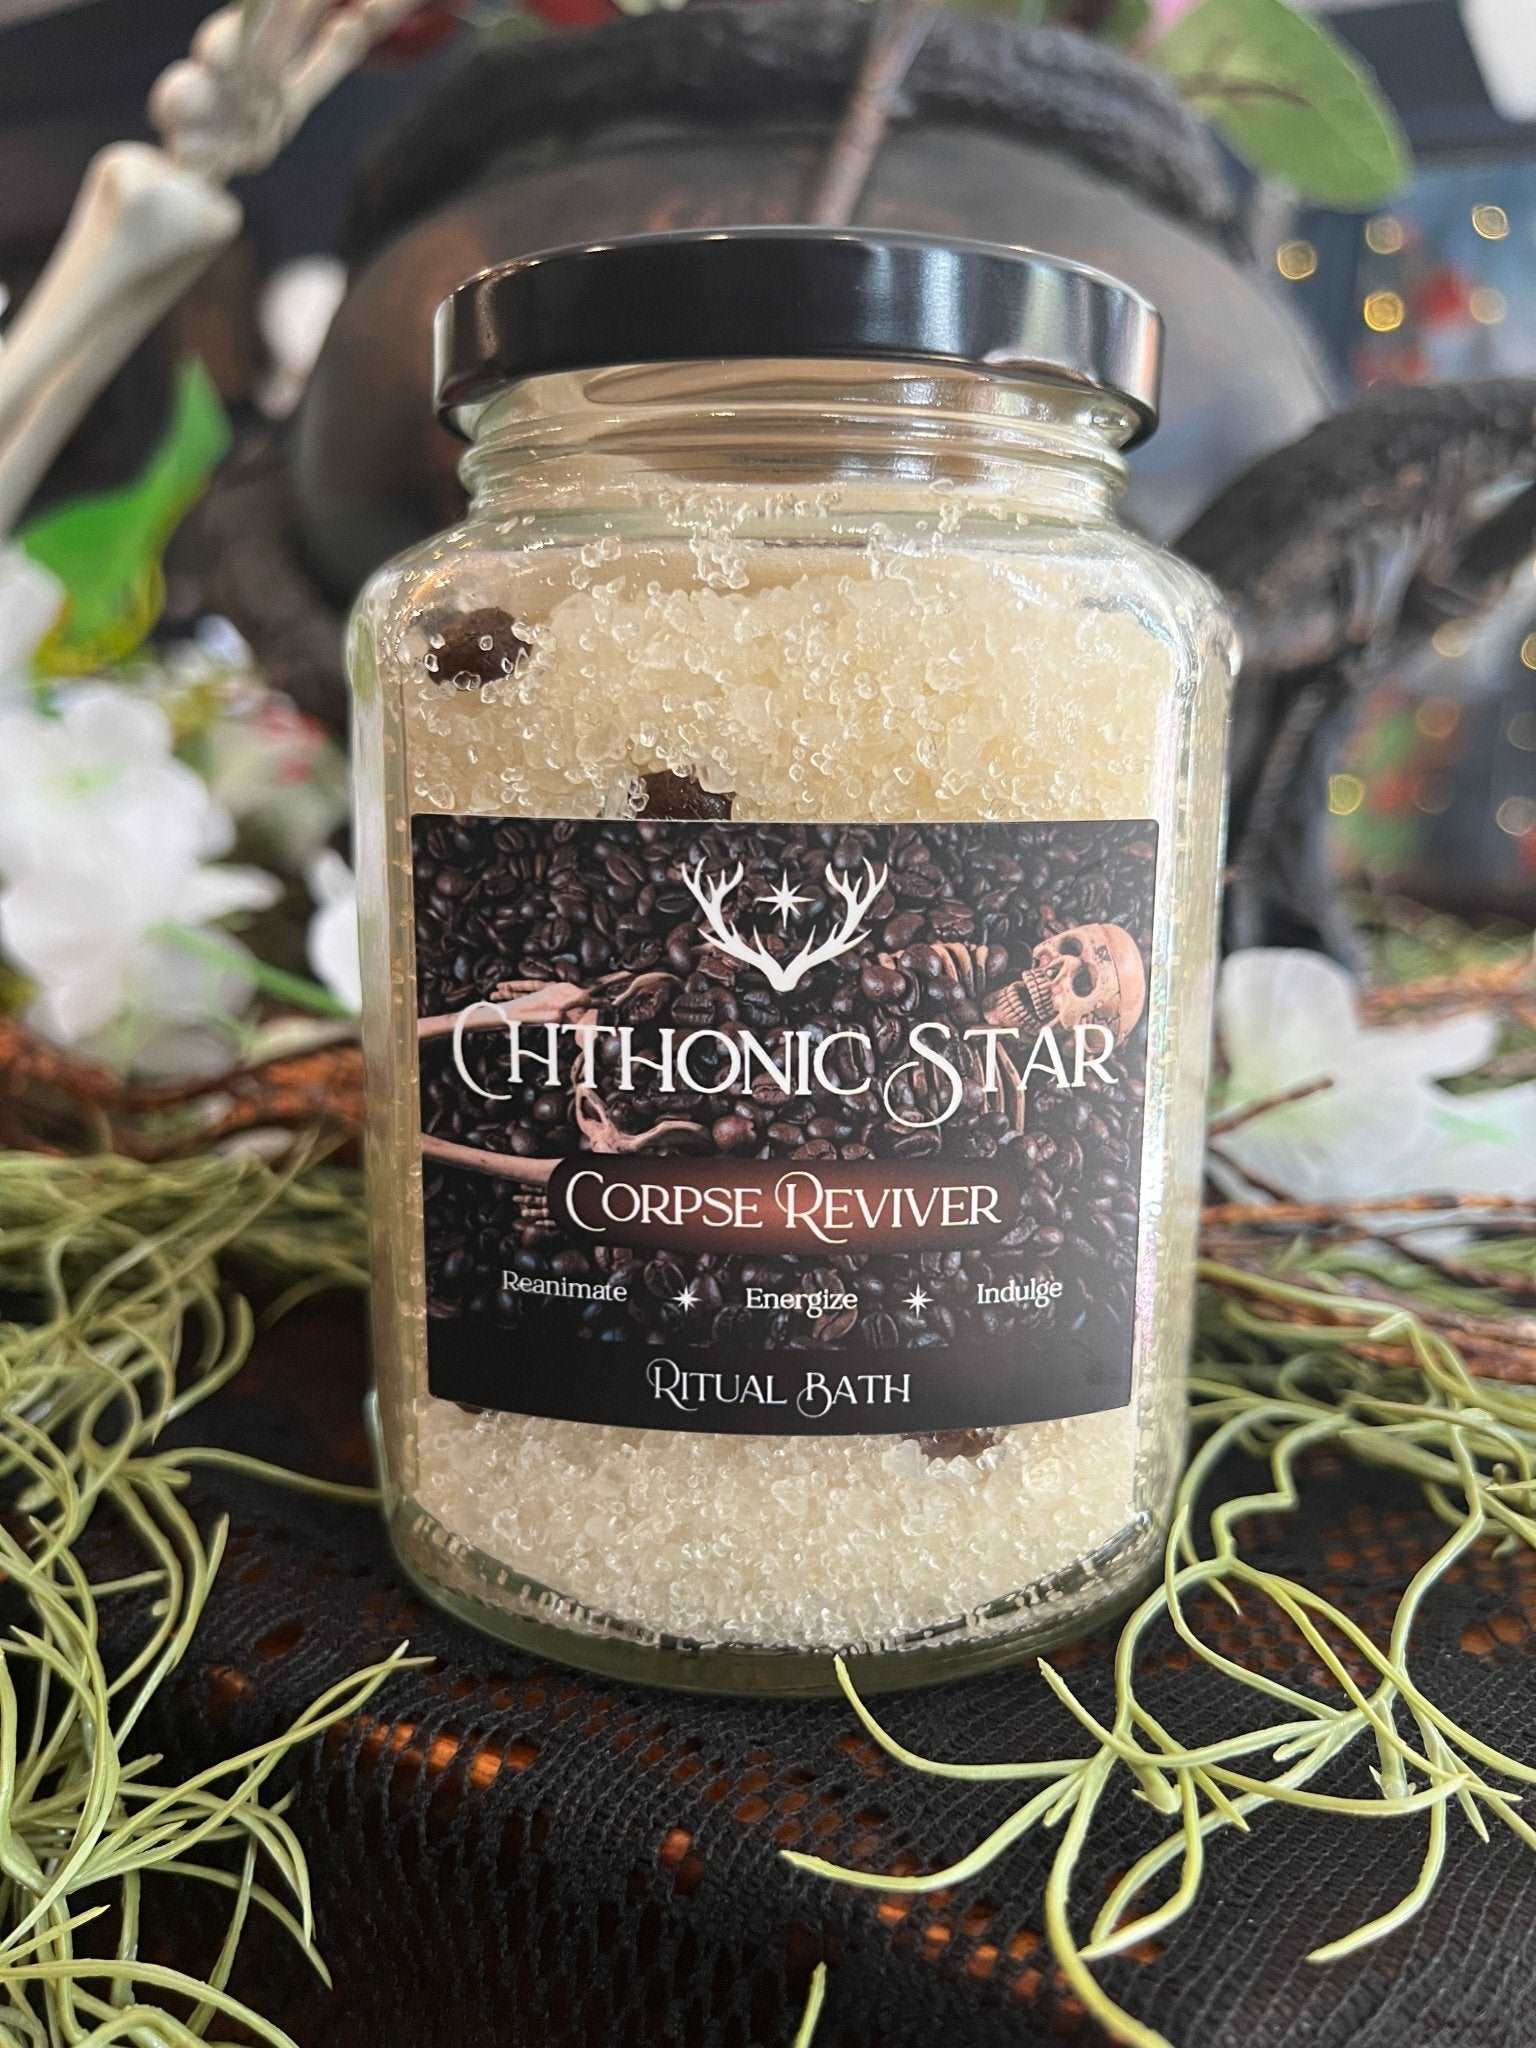 Corpse Reviver Ritual Bath by Chthonic Star - Nocturne LLC